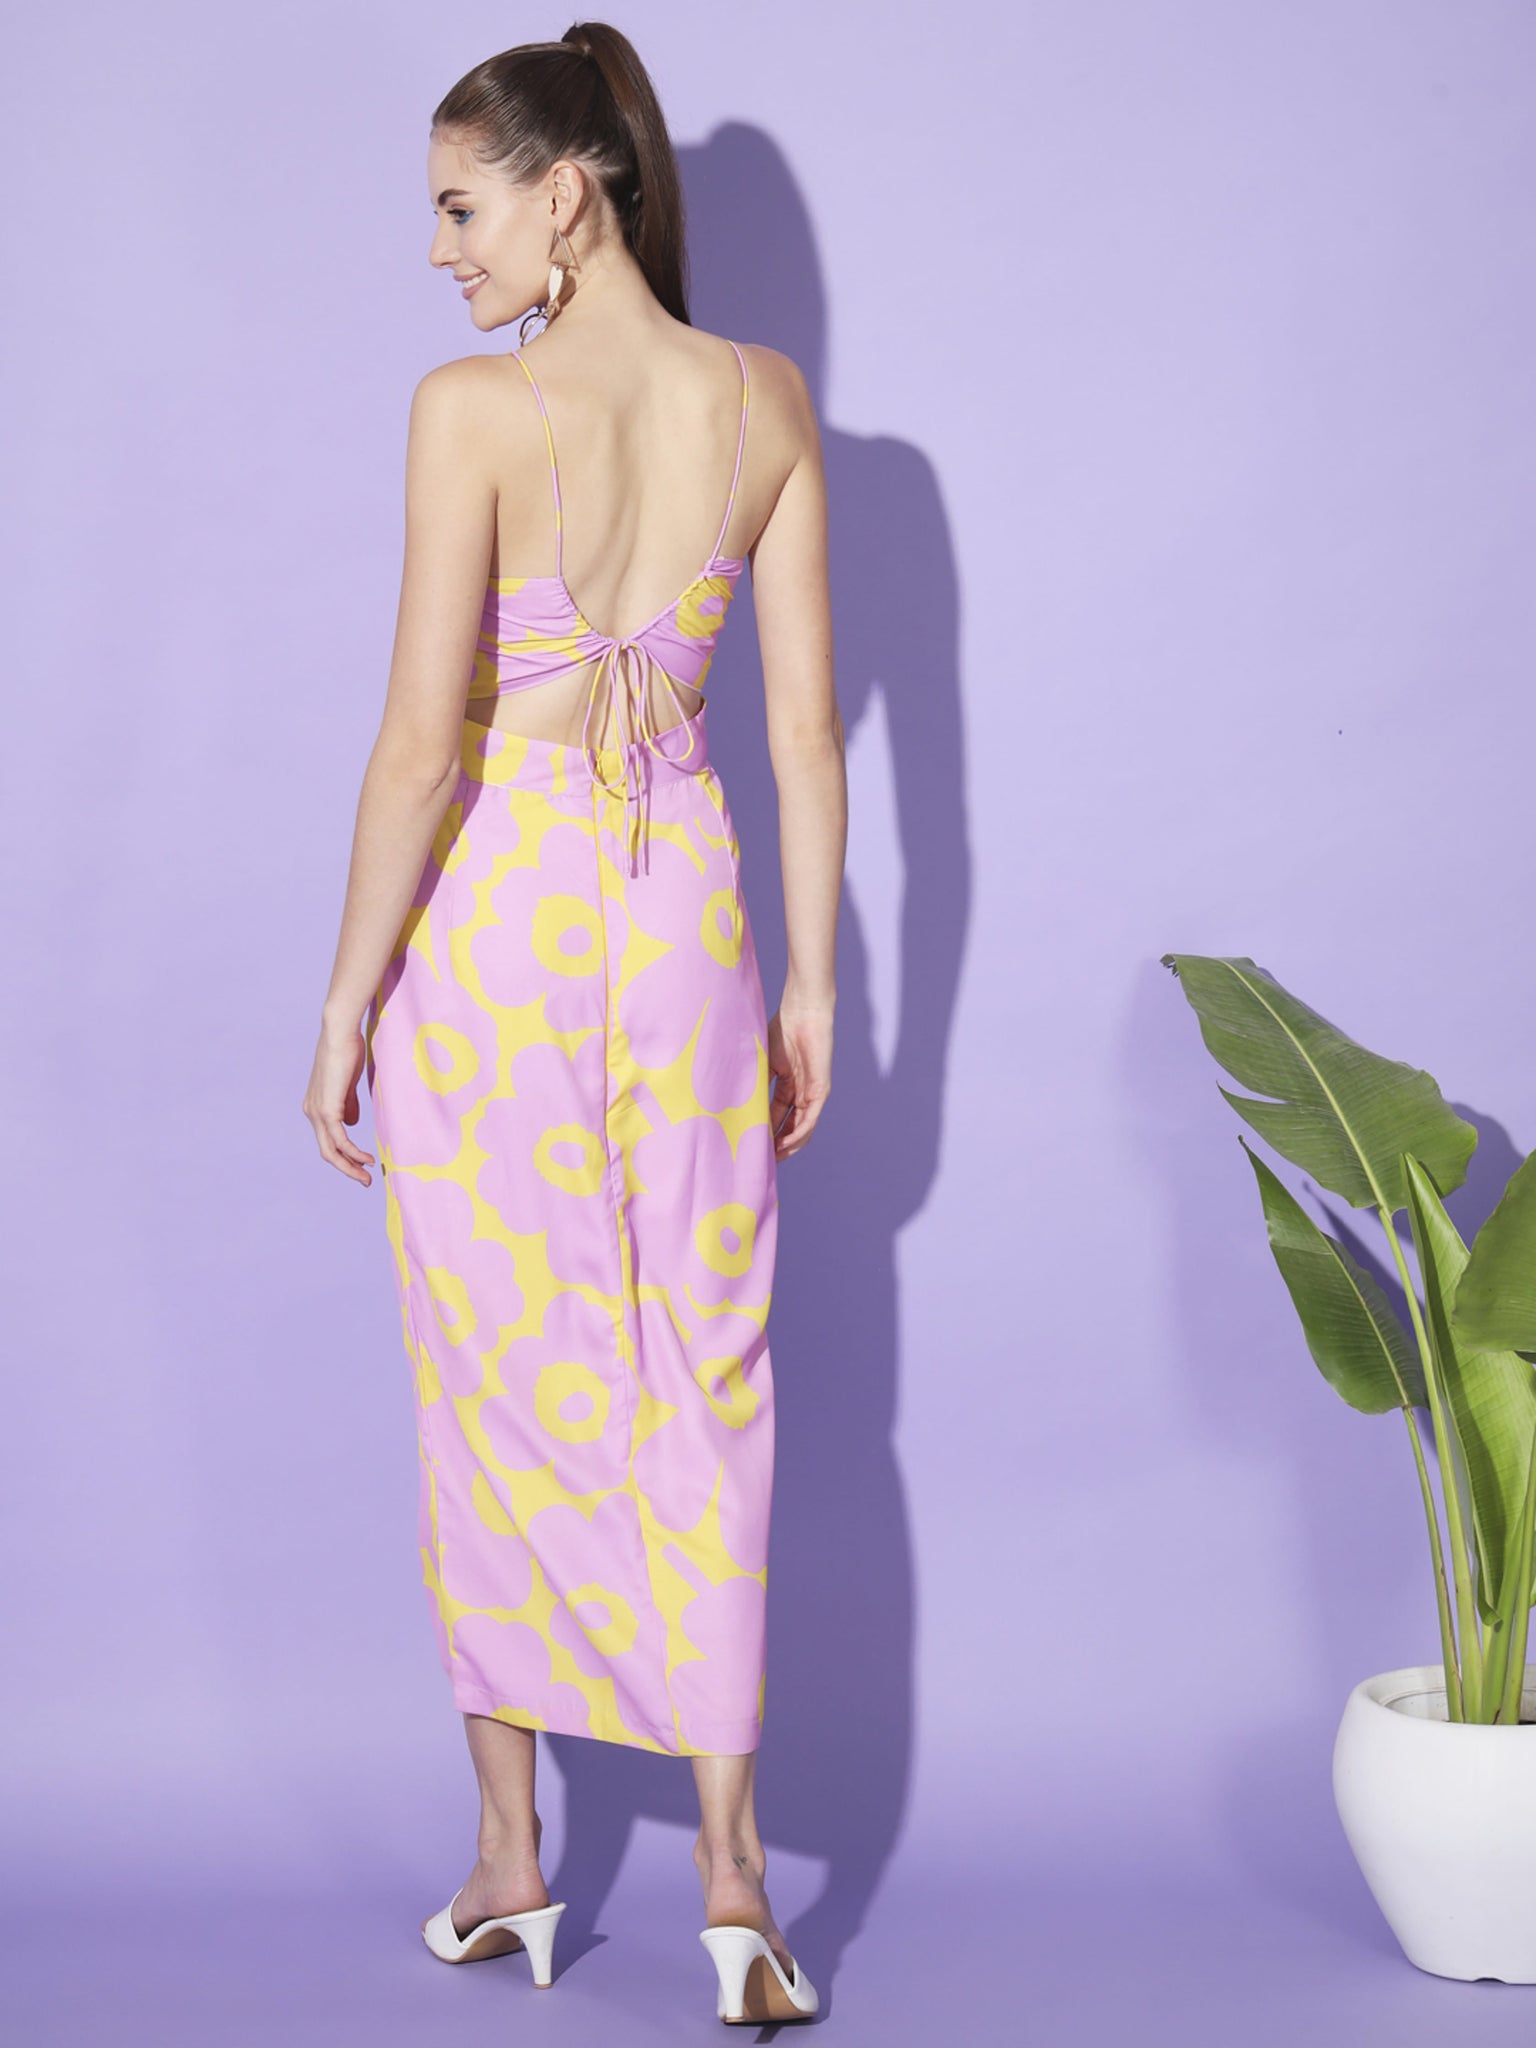 Sunset Bloom: Pink and Yellow Floral Designer Dress